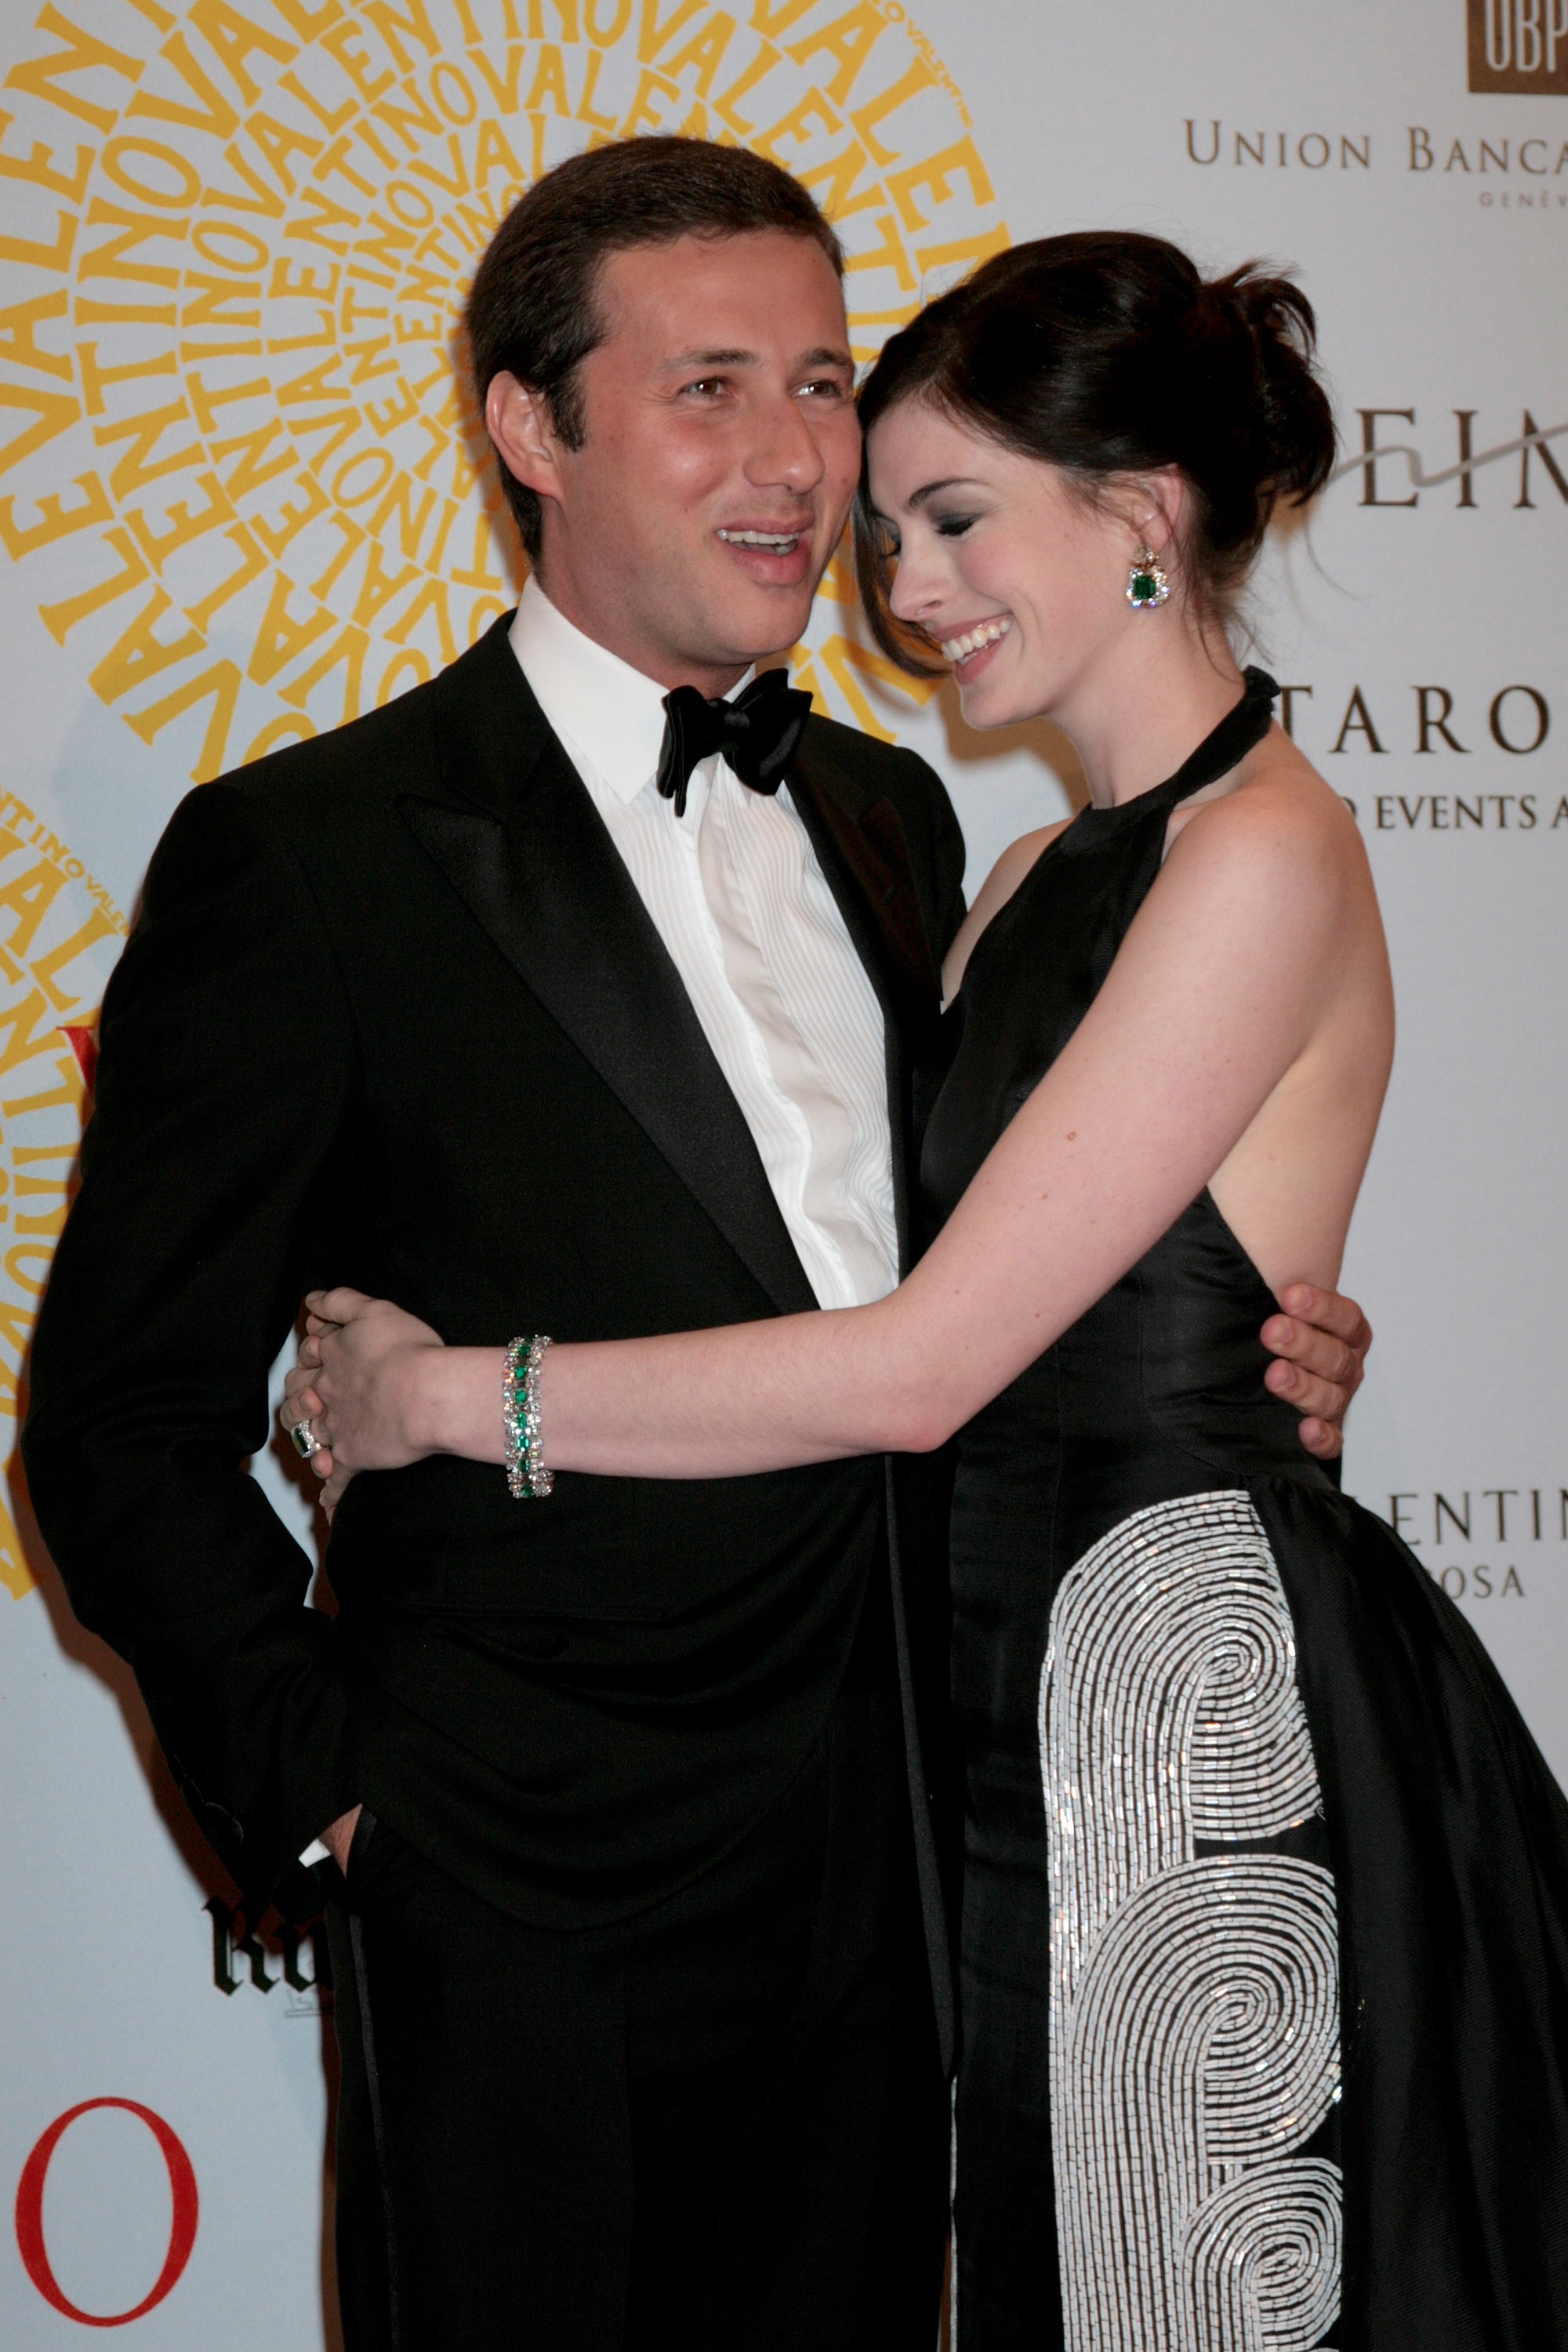 ROME, ITALY - JULY 7: Anne Hathaway and Raffaello Follieri arrives at the post haute couture show gala dinner and ball in the Parco dei Daini at the Villa Borghese on July 7, 2007 in Rome, Italy. Fashion icon Valentino decided to mark the celebration of the 45th anniversary of his luxury brand by breaking a 17 year tradition of unveiling his luxurious haute couture collections for women in Paris with a show in Rome. Valentino showed about 64 couture dresses, a record number considering a HC show never shows more than 40 gowns. (Photo by Elisabetta Villa /Getty Images)